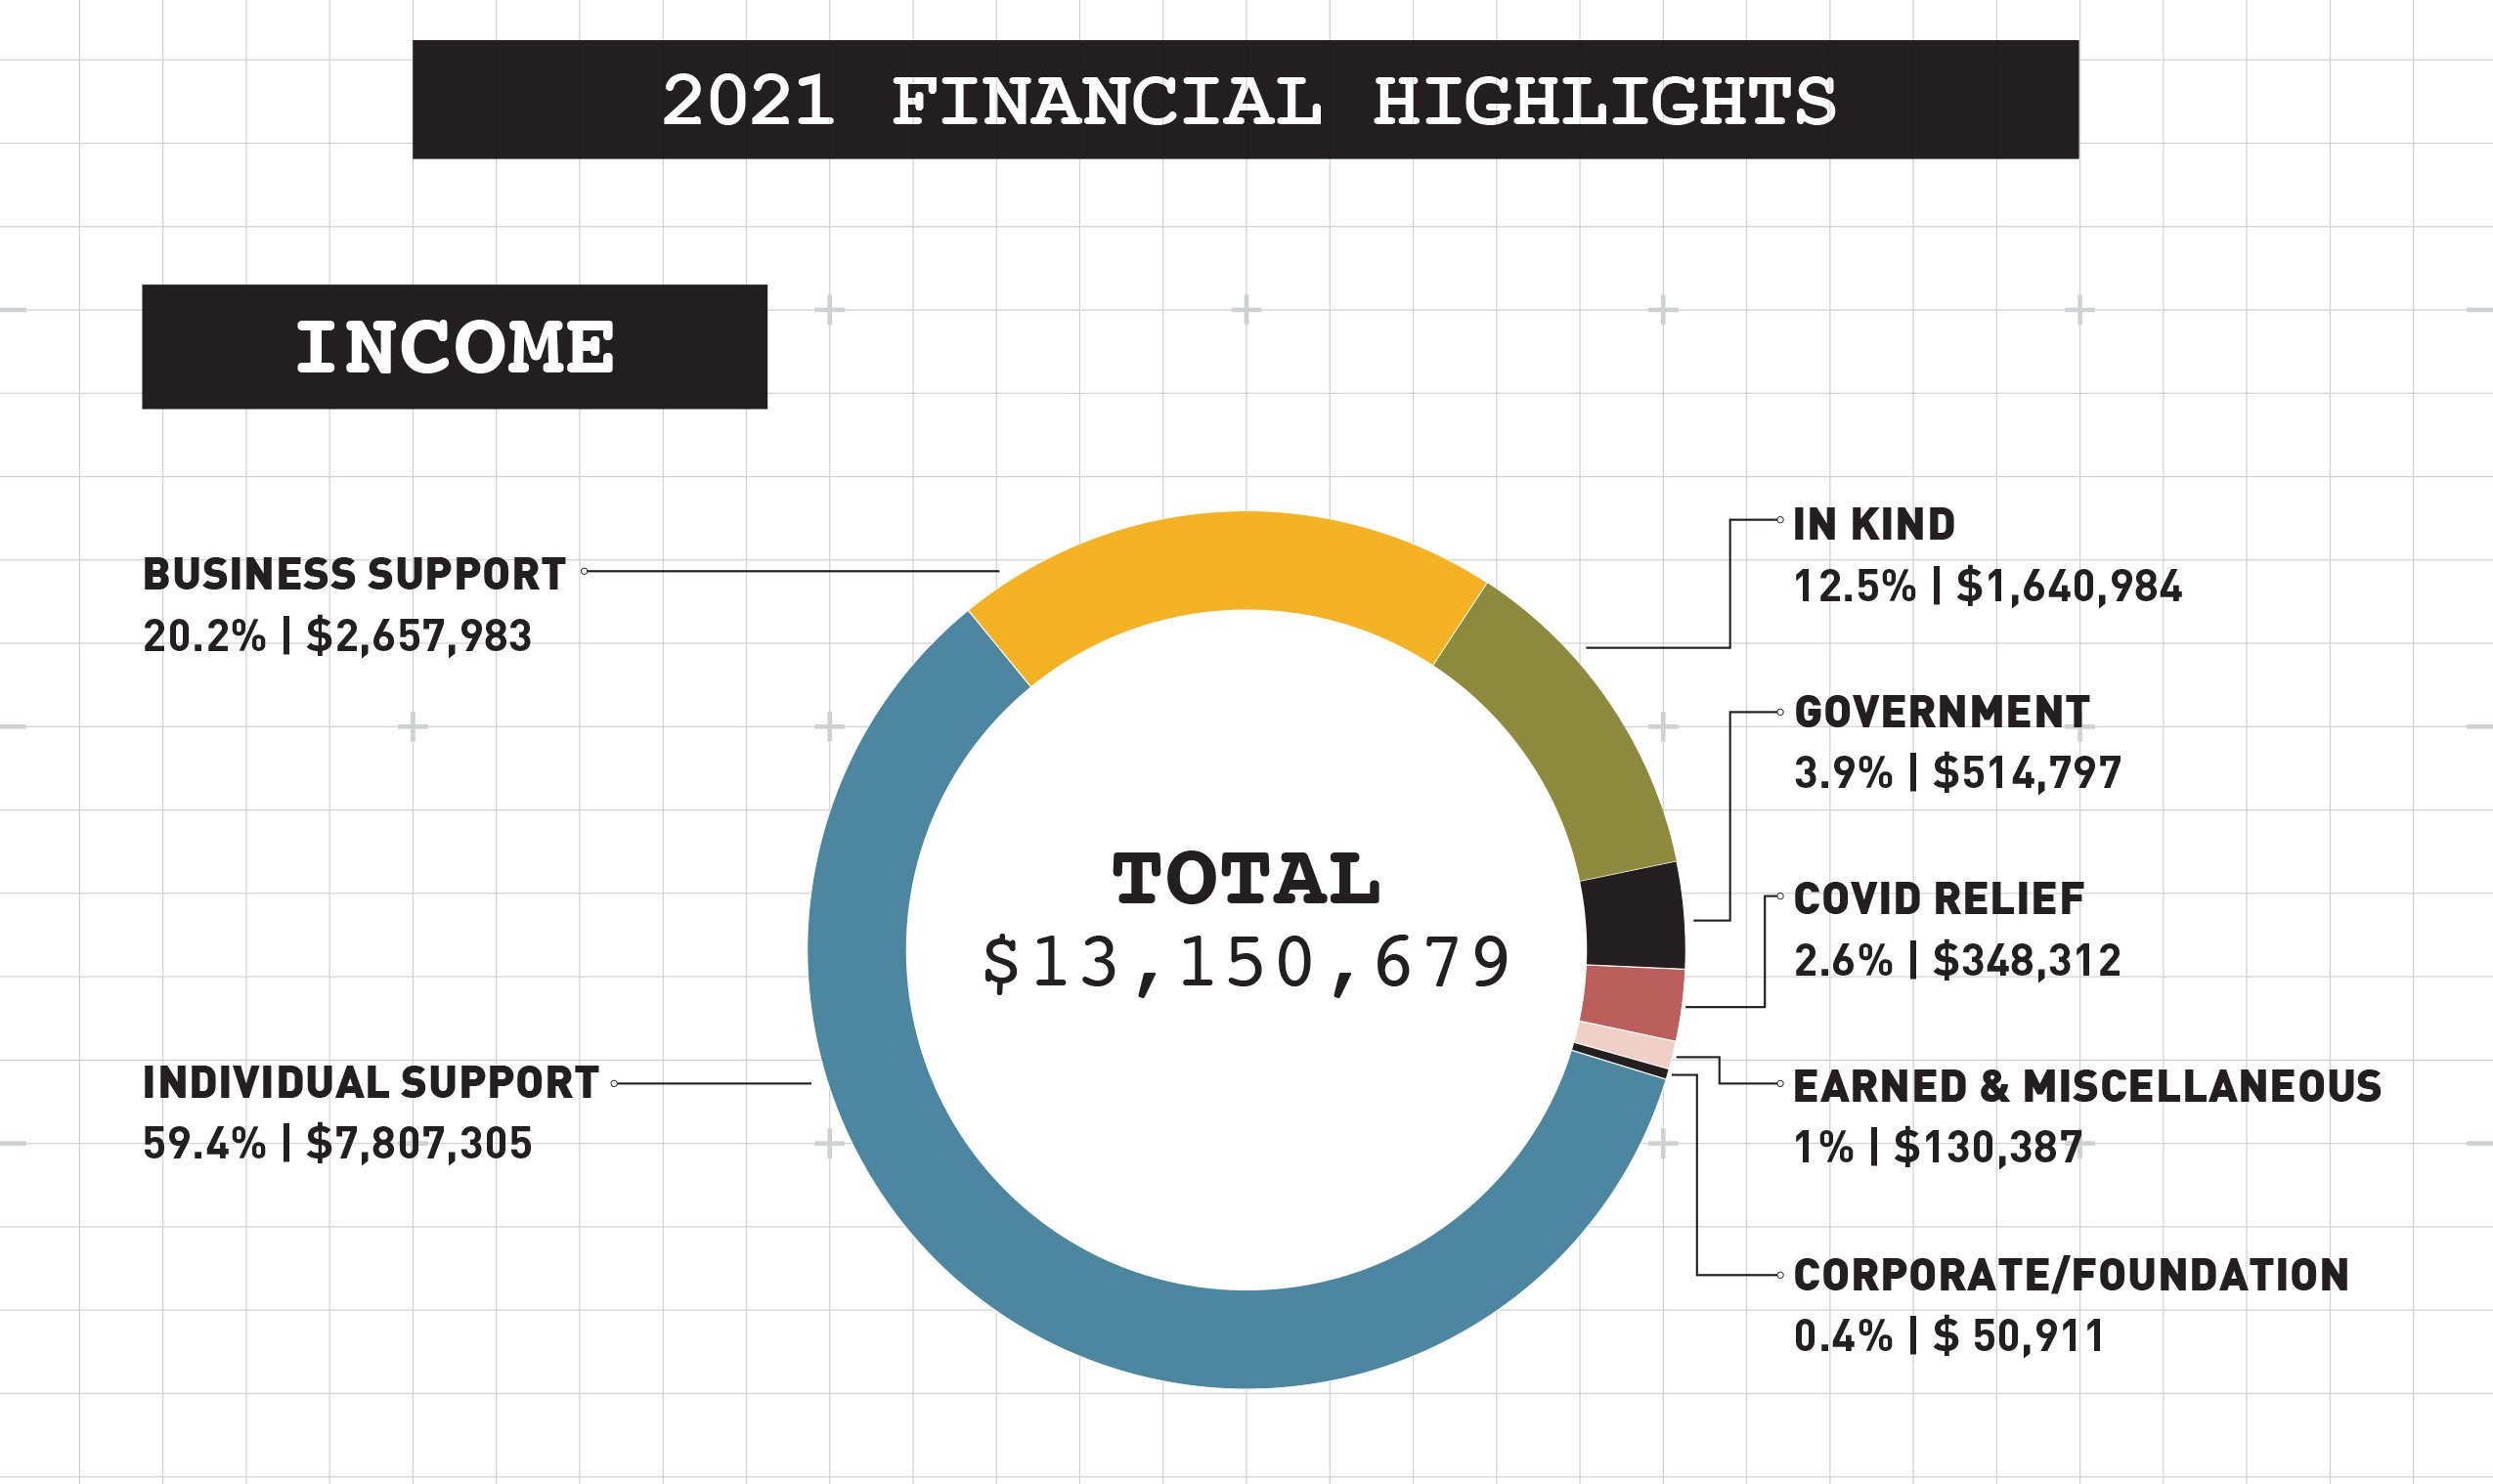 Pie Chart: 2021 Financial Highlights (full data in next section "More 2021 Financial Highlights"